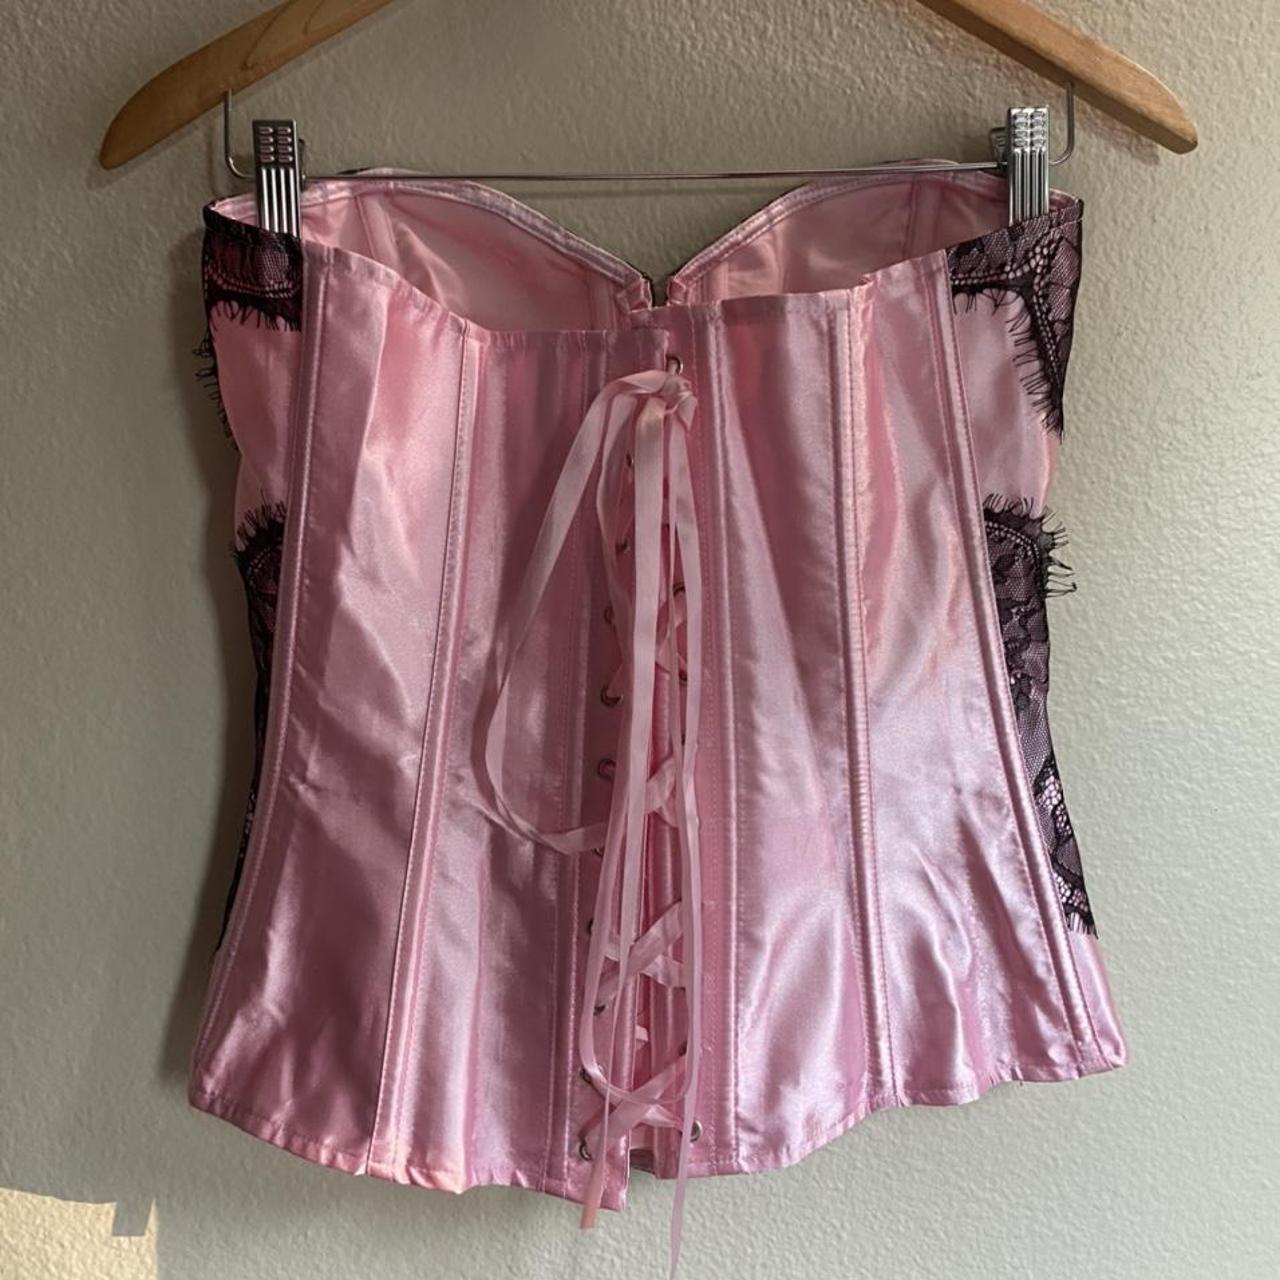 Pink corset from Adore Me with black lace and - Depop